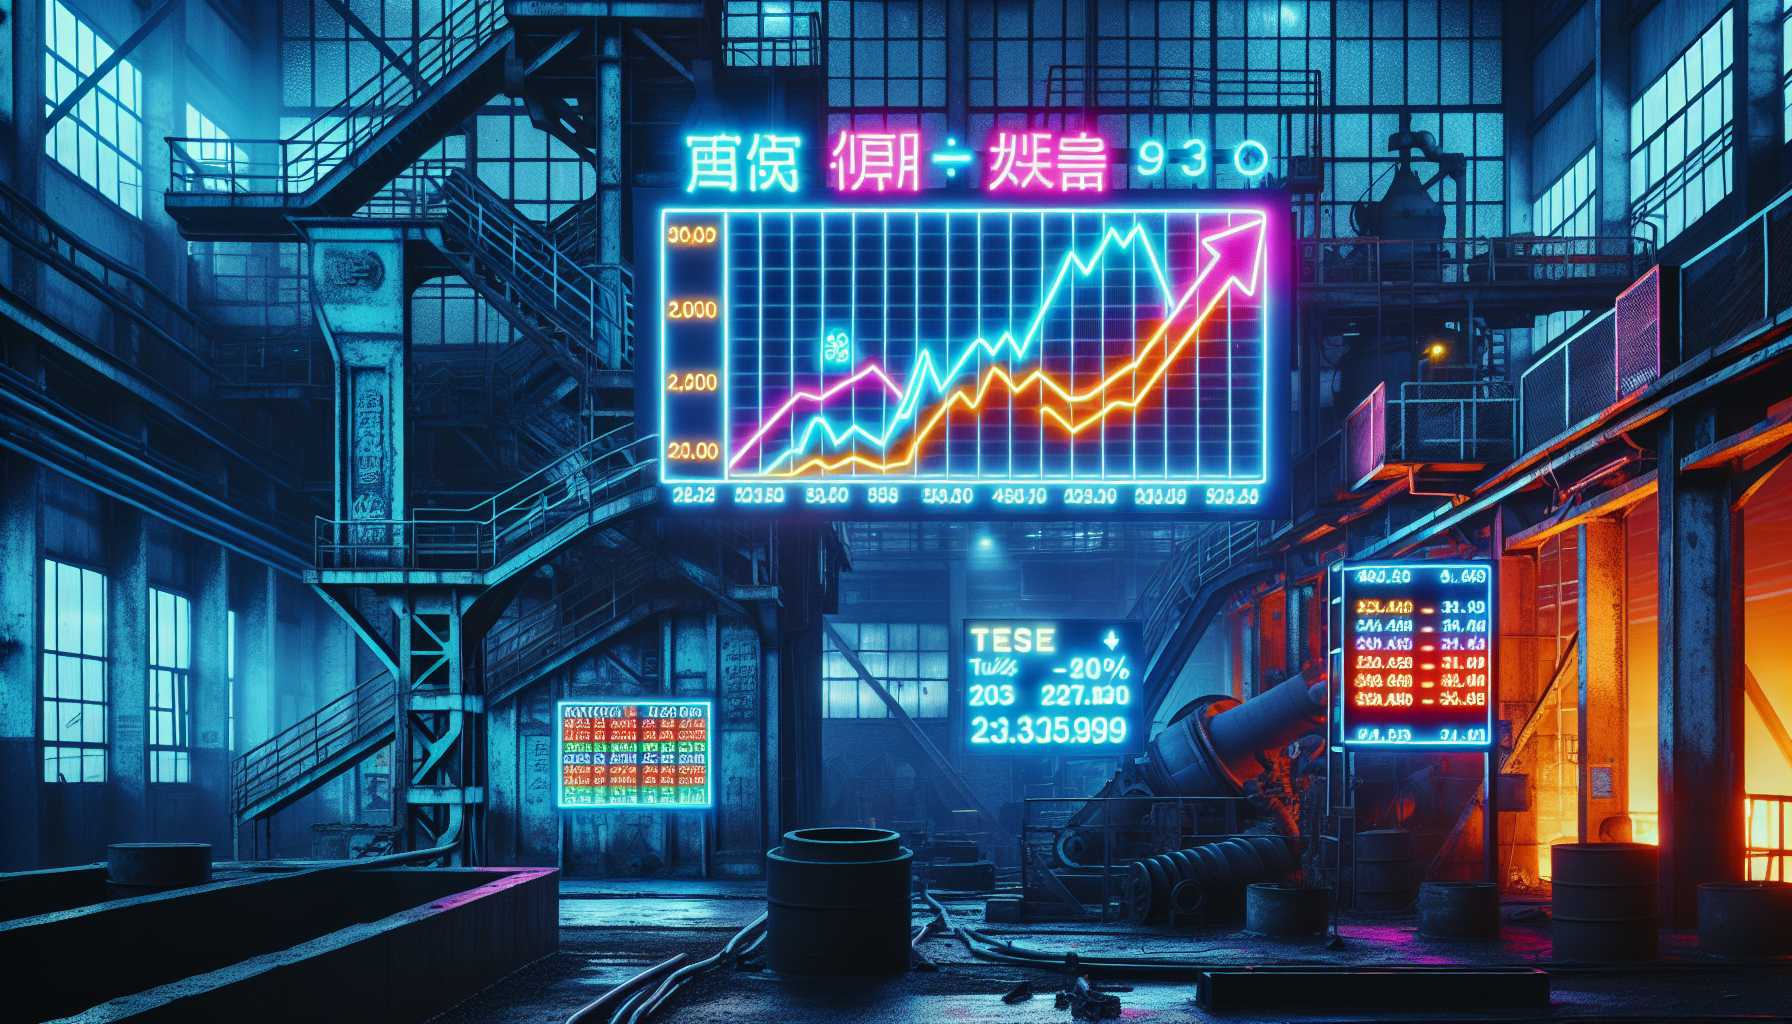 Intel foundry with neon signs showing financial graphs trending downwards indicating losses